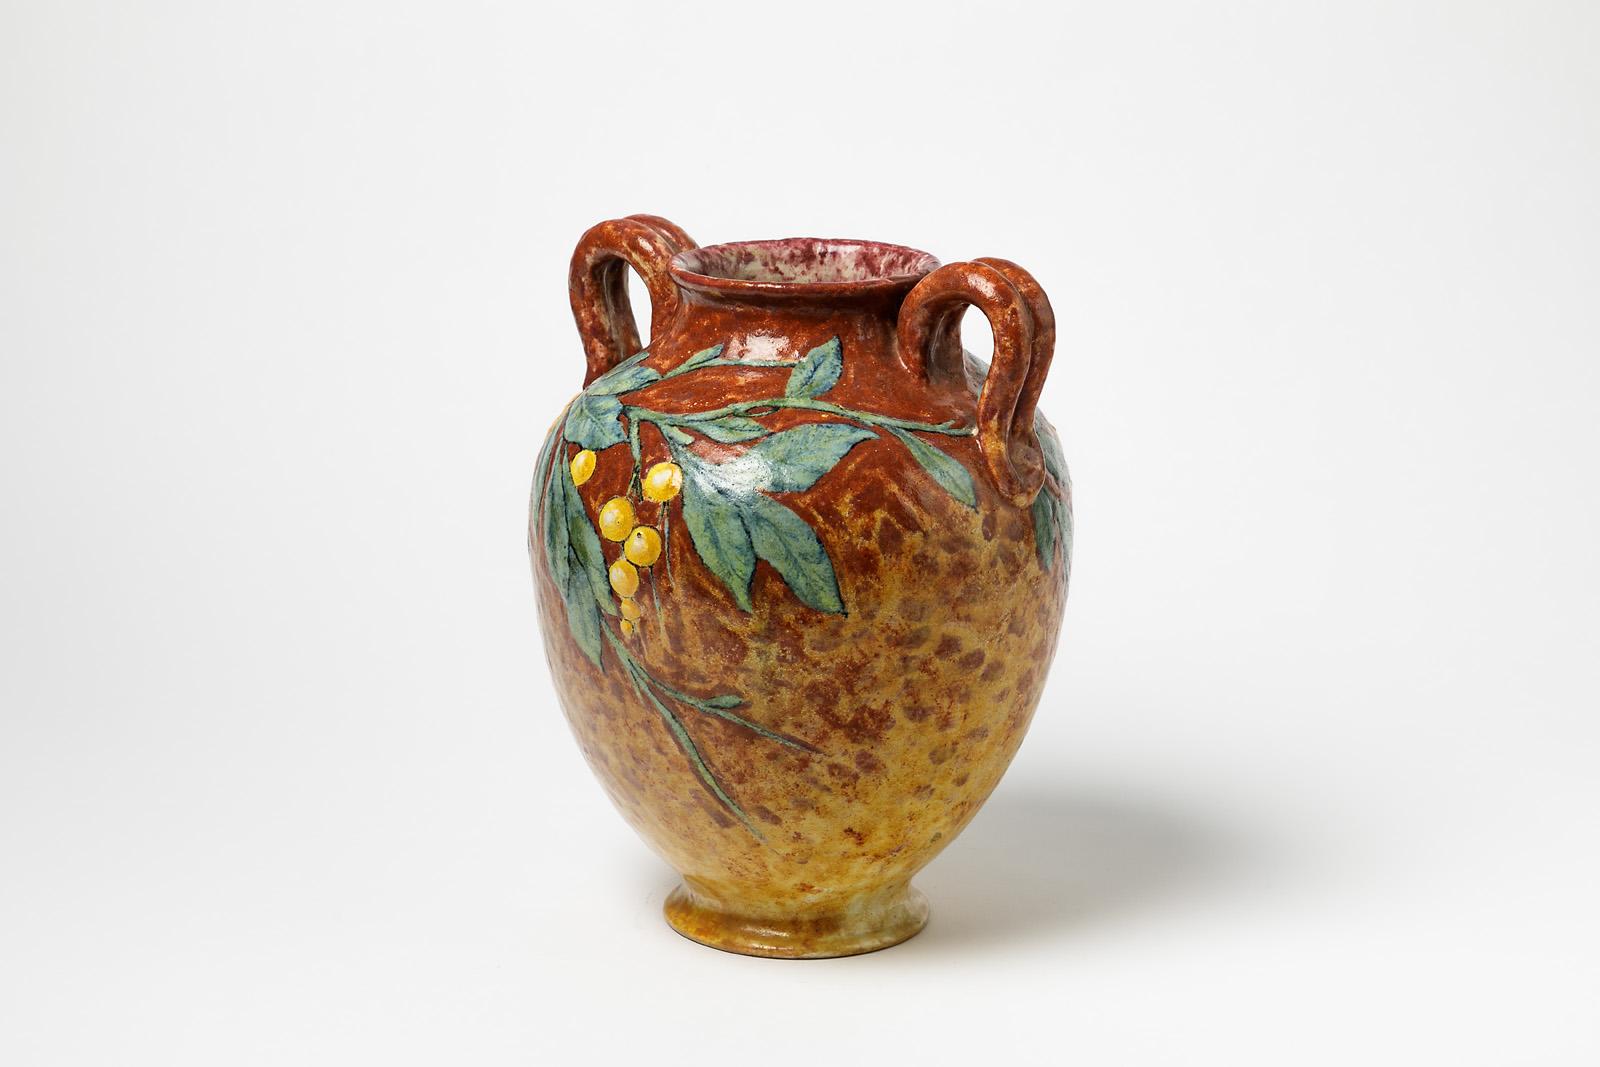 Henry Chaumeil

Signed and dated 1912

Elegant art decorative ceramic vase by French artist.

Orange, yellow and green ceramic glazes colors.

Fruits and olive branch decoration.

Measures: Height 28cm, large 23cm, depth 20cm.